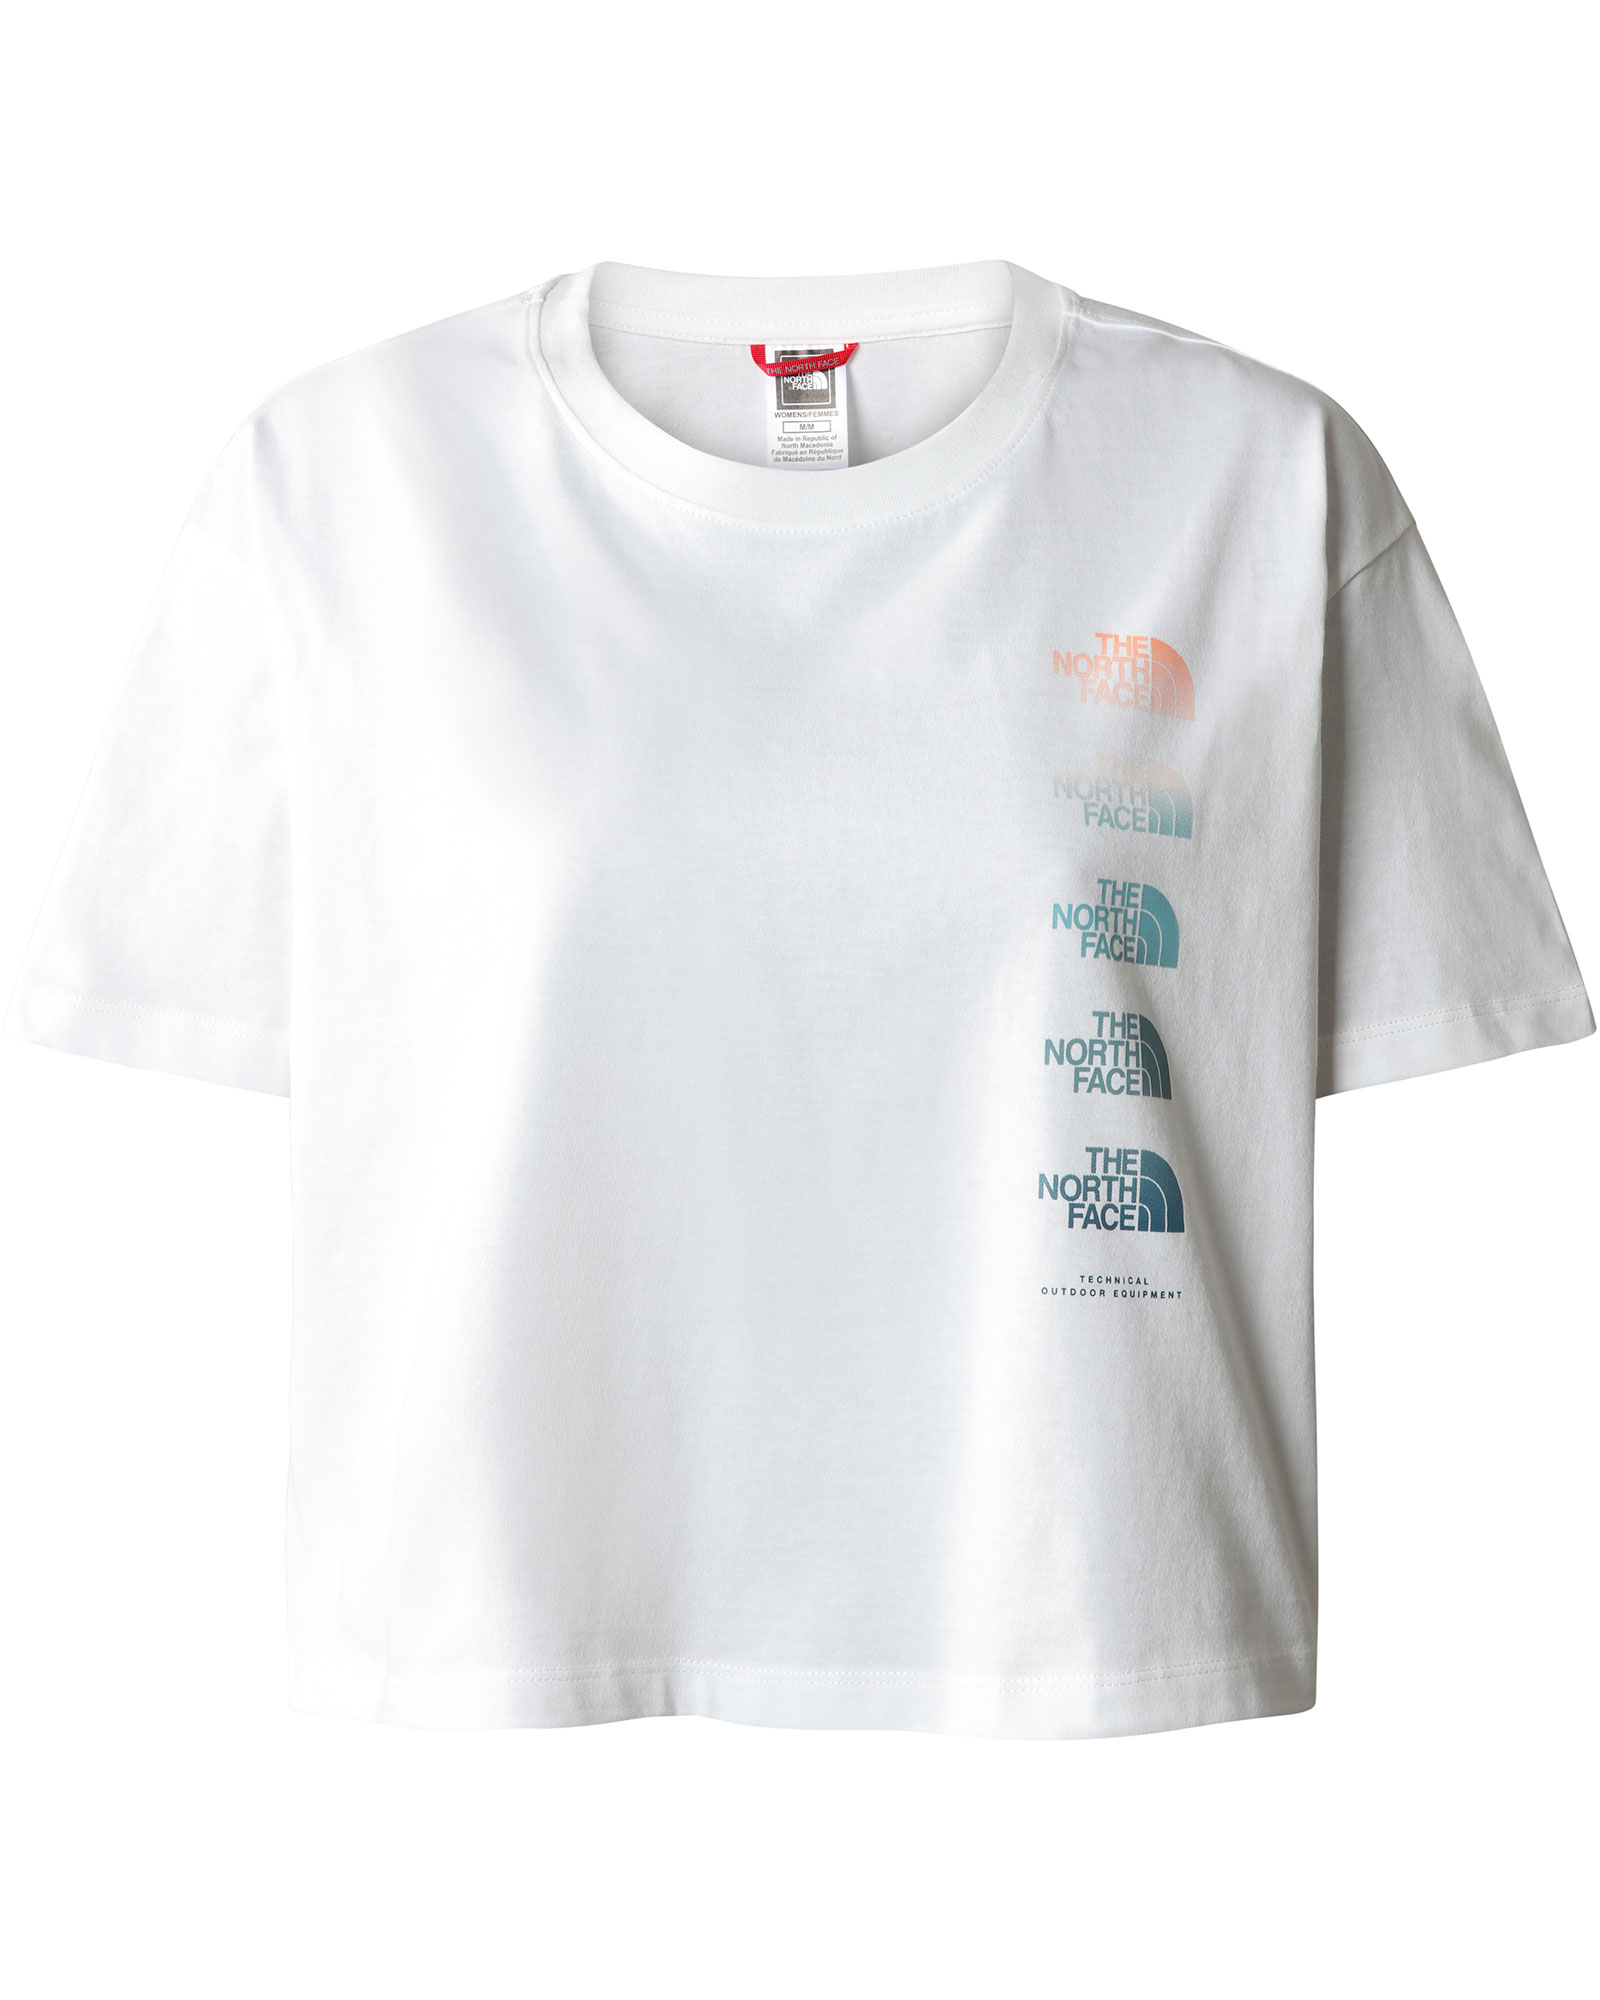 The North Face Women’s D2 Graphic Crop T Shirt - Gardenia White S